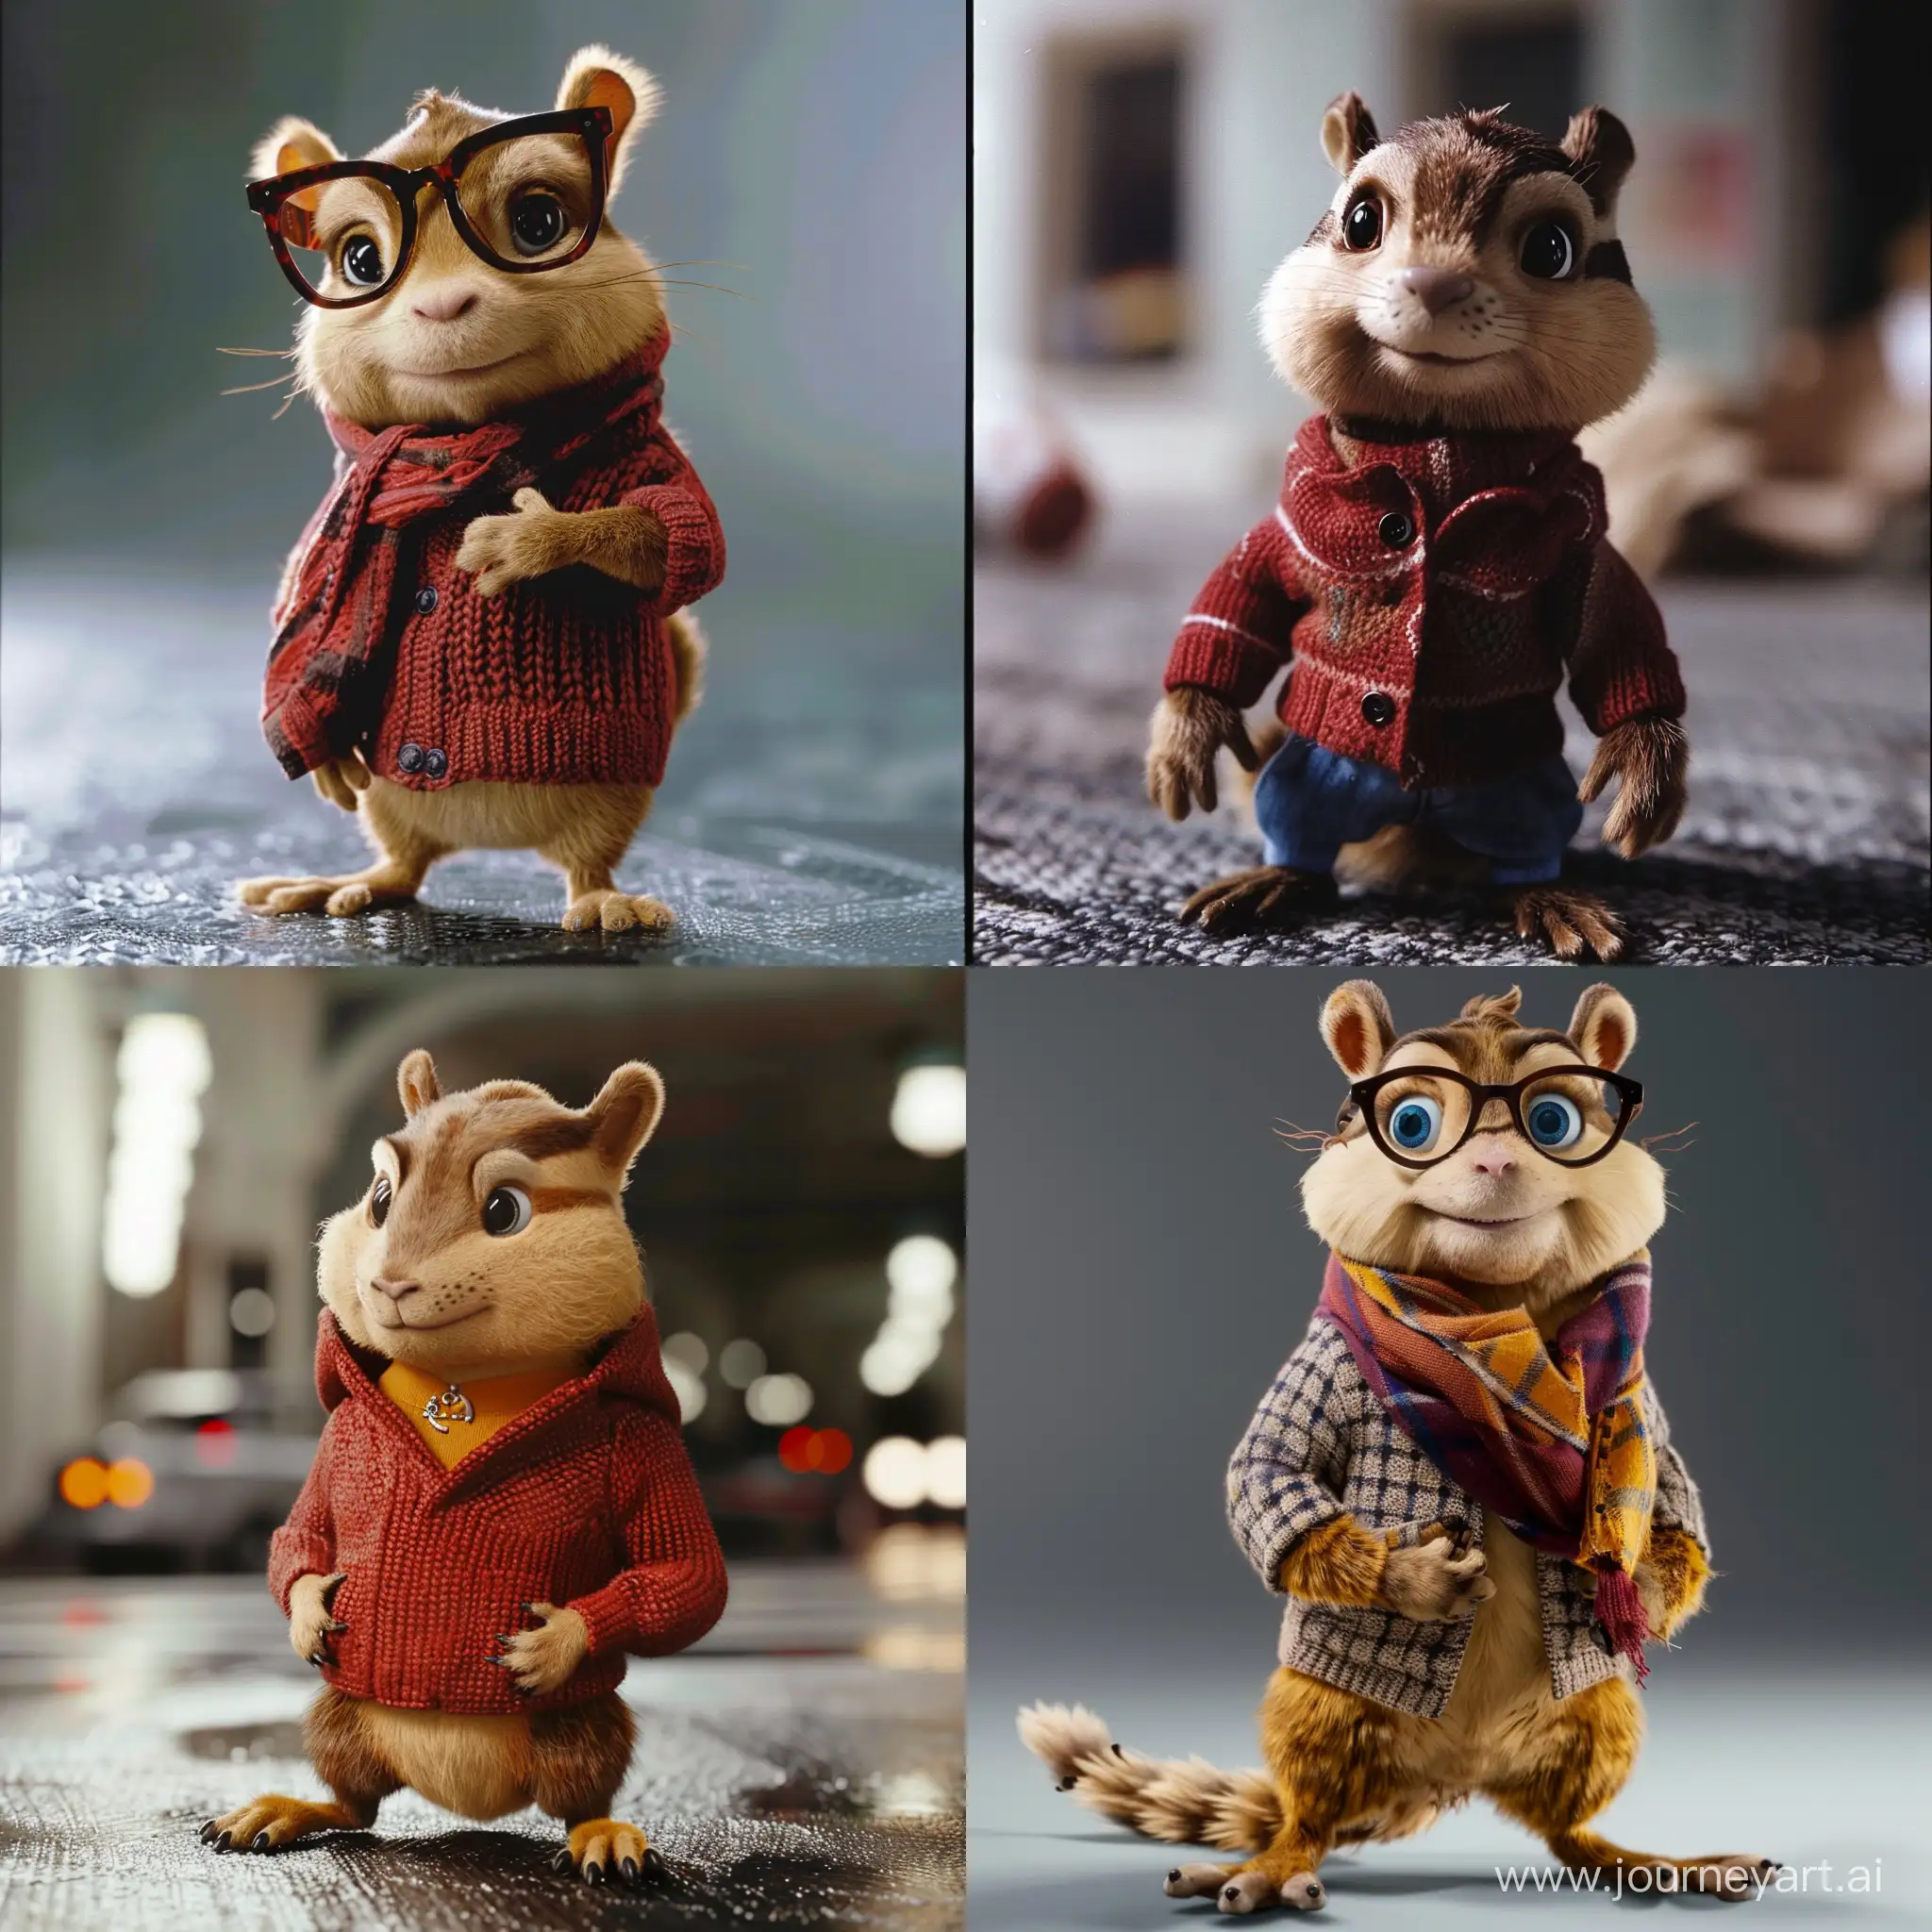 Alvin-from-Alvin-and-the-Chipmunks-Wearing-Balenciaga-Clothing